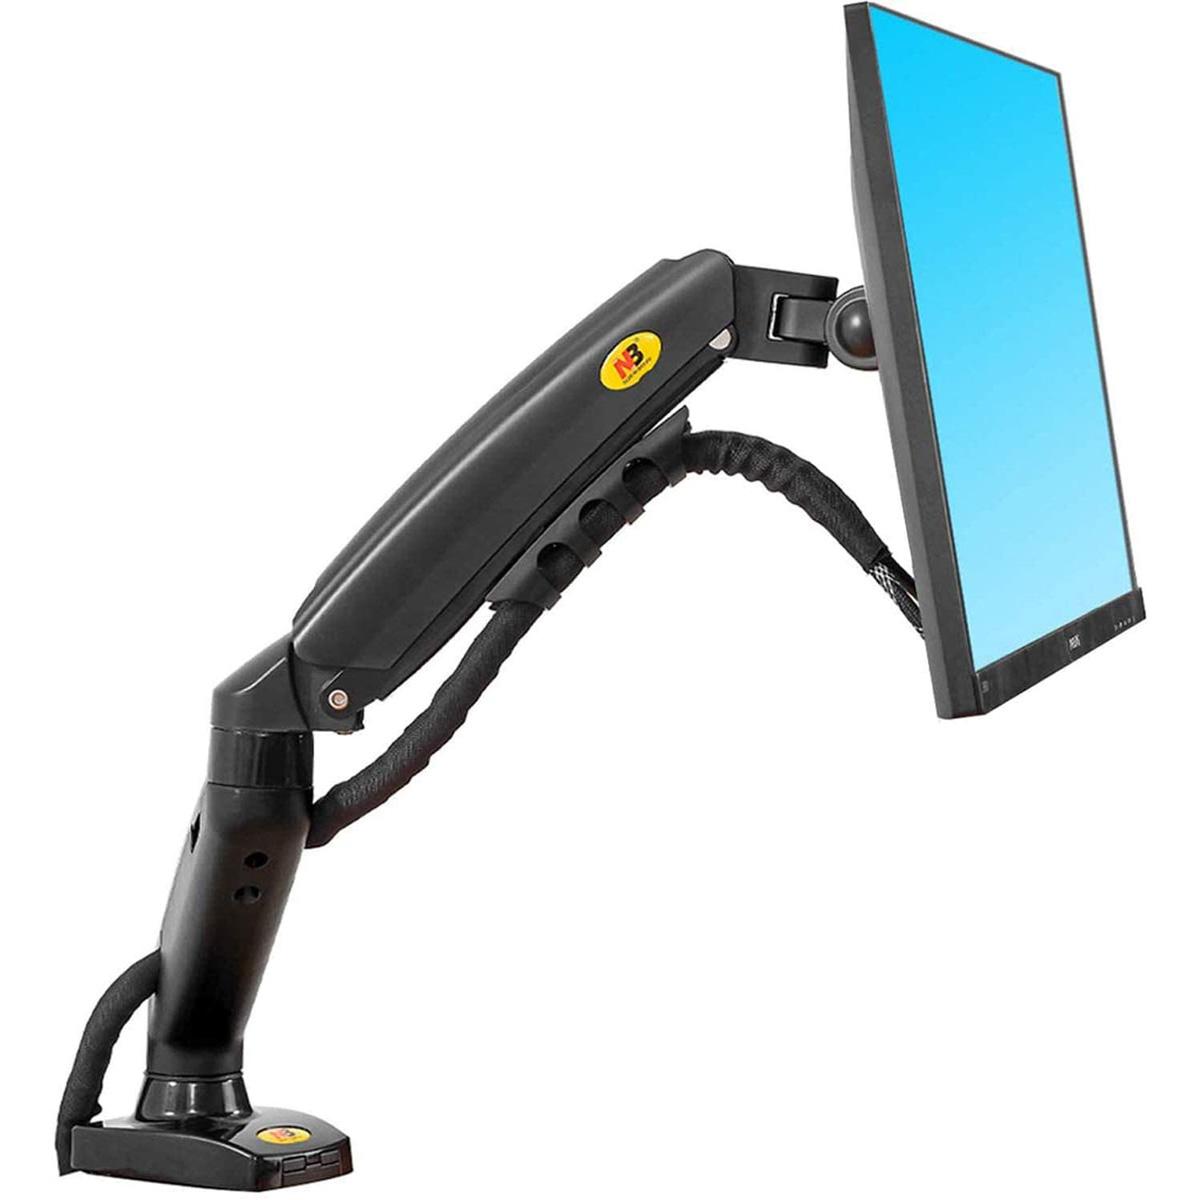 Monitor Desk Mount Stand Full Motion Swivel Monitor Arm for $23.90 Shipped